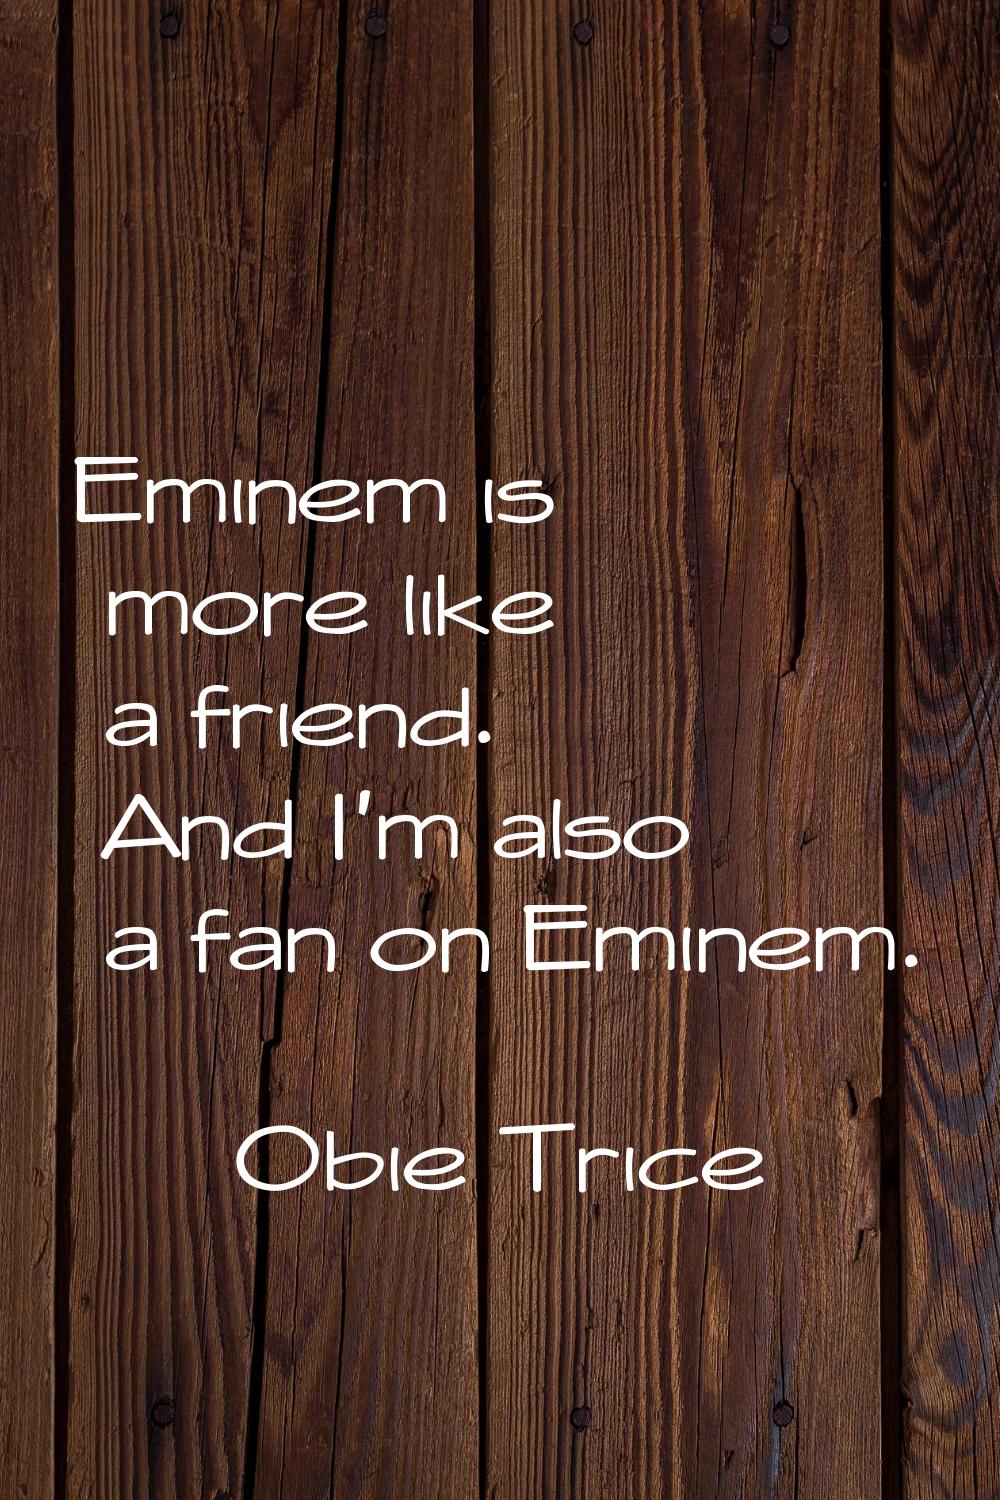 Eminem is more like a friend. And I'm also a fan on Eminem.